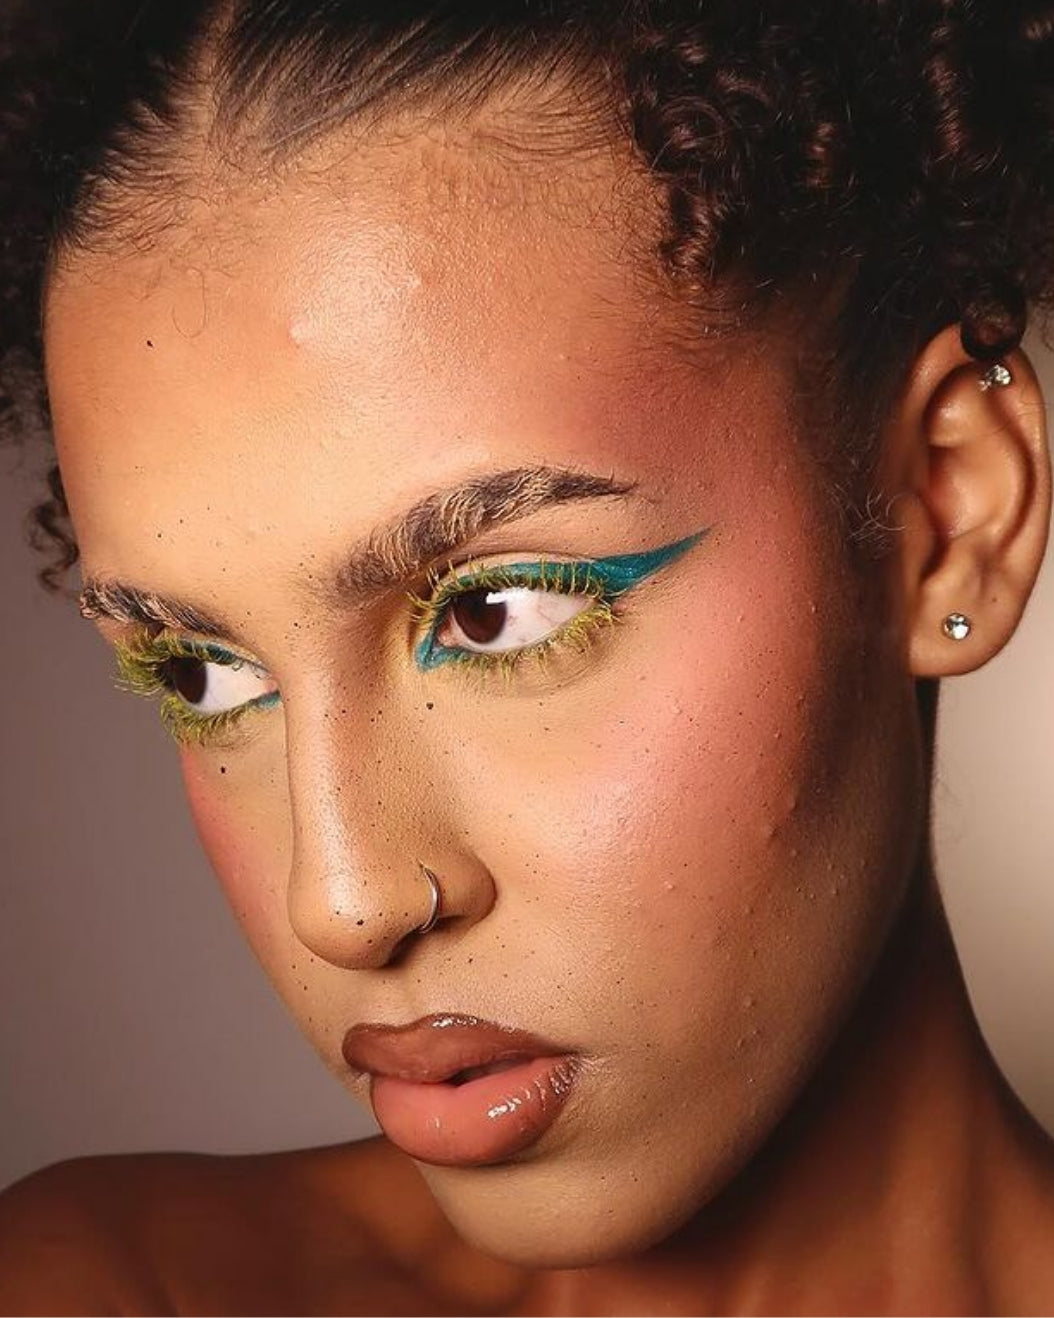 Model wears colorful eye makeup with colorful eyelashes for holiday makeup inspiration